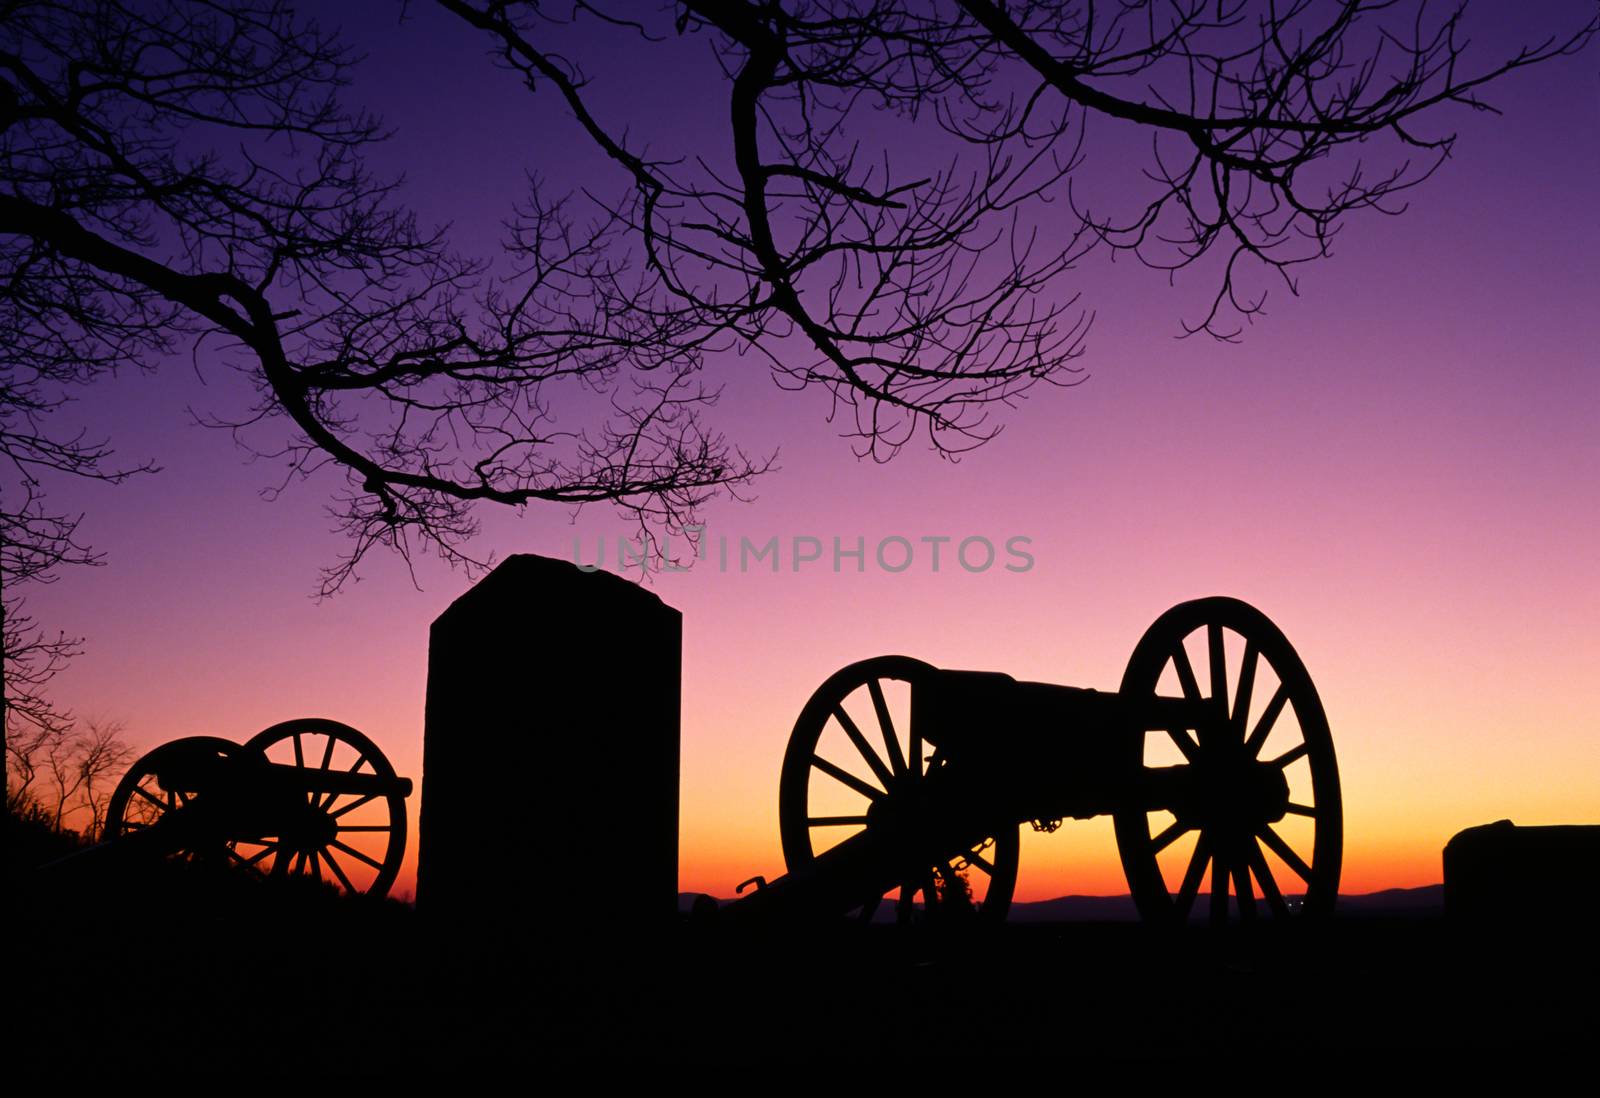 War Memorial Wheeled Cannon Military Civil War Weapon Dusk Sunset by ChrisBoswell